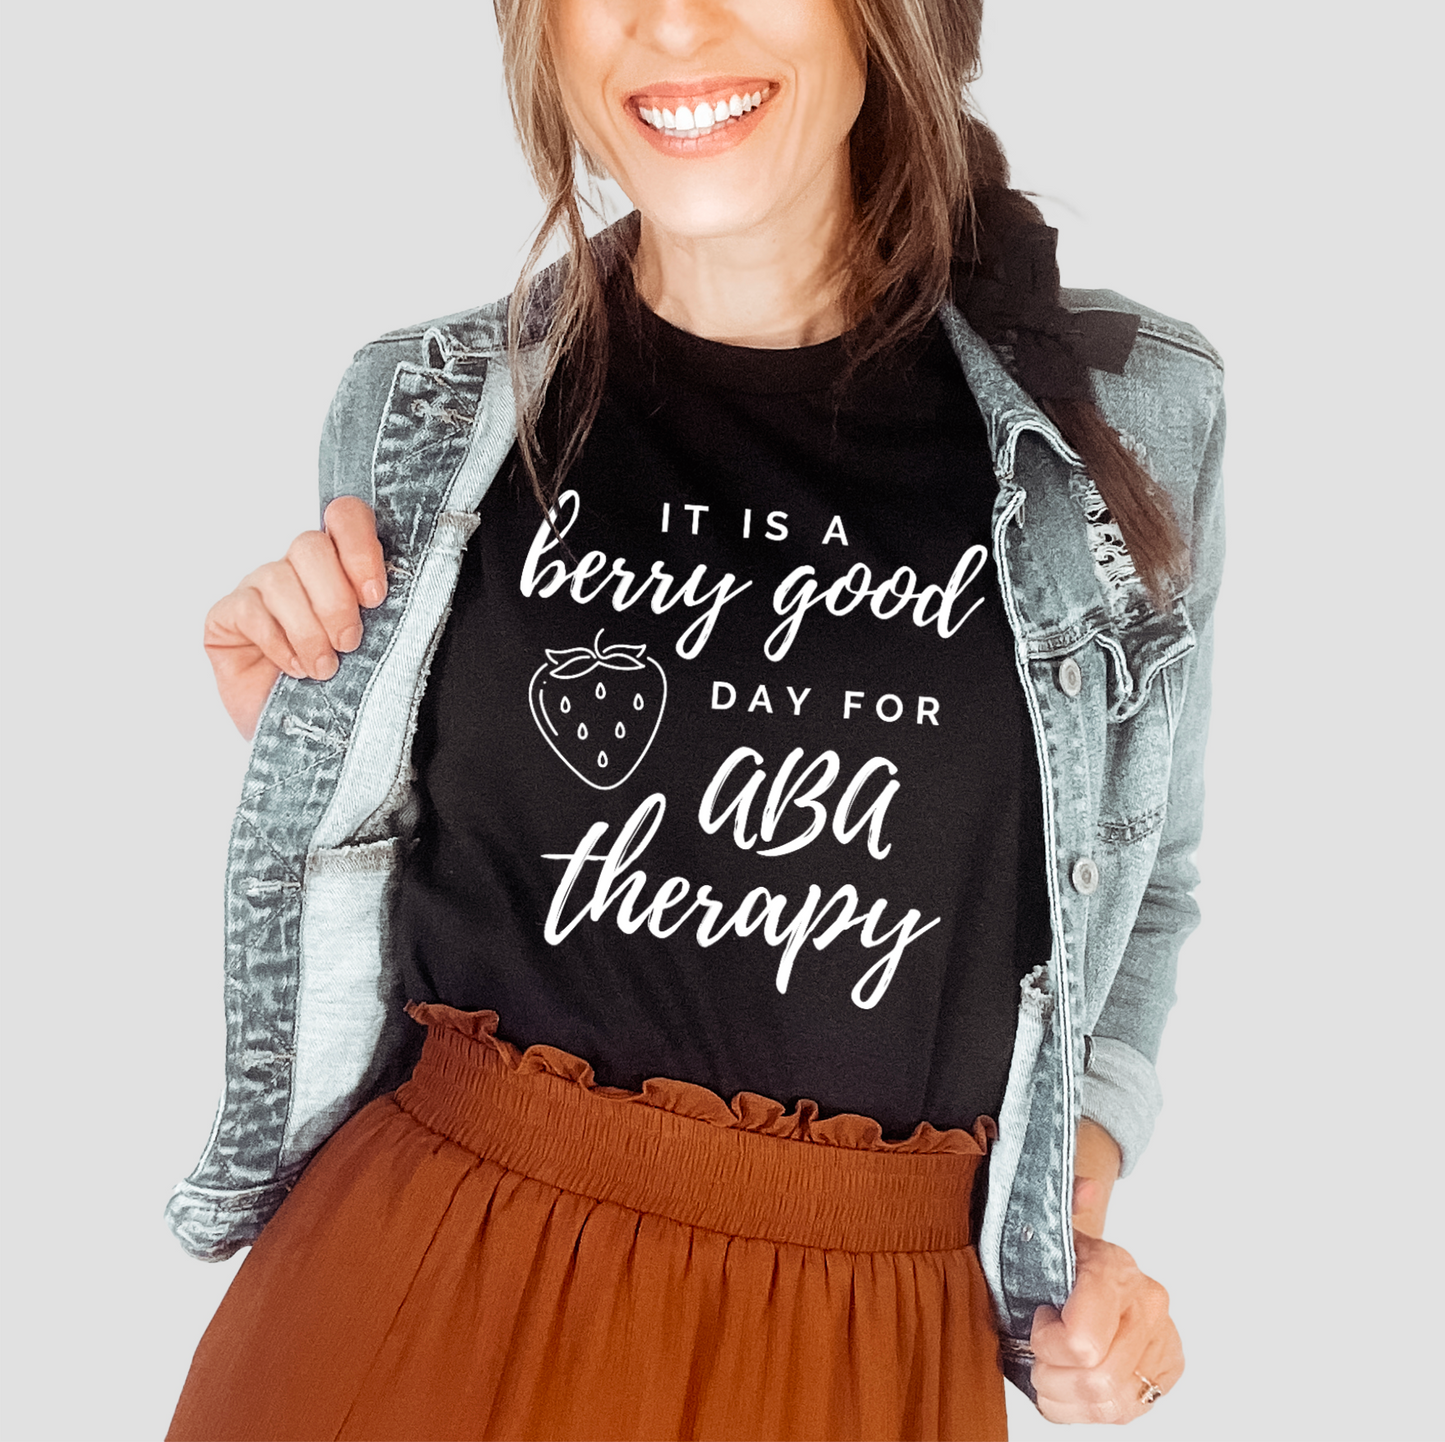 It's A Berry Good Day For ABA Therapy Shirt | Applied Behavior Analysis | Autism awareness | behavior analyst | behavior therapist